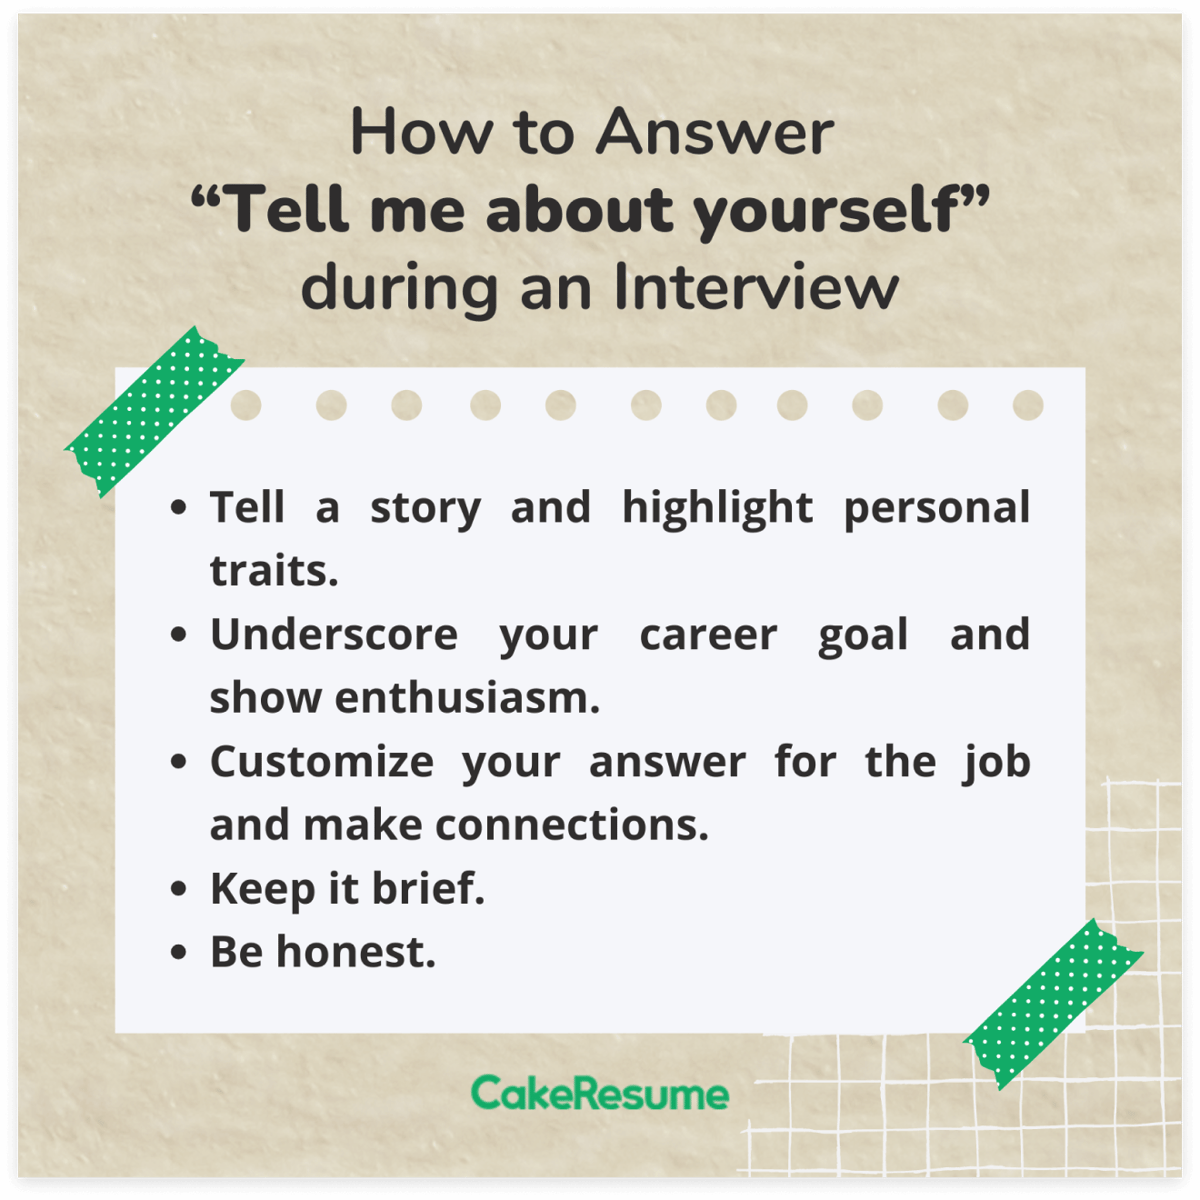 Best answer for tell me about yourself in an interview